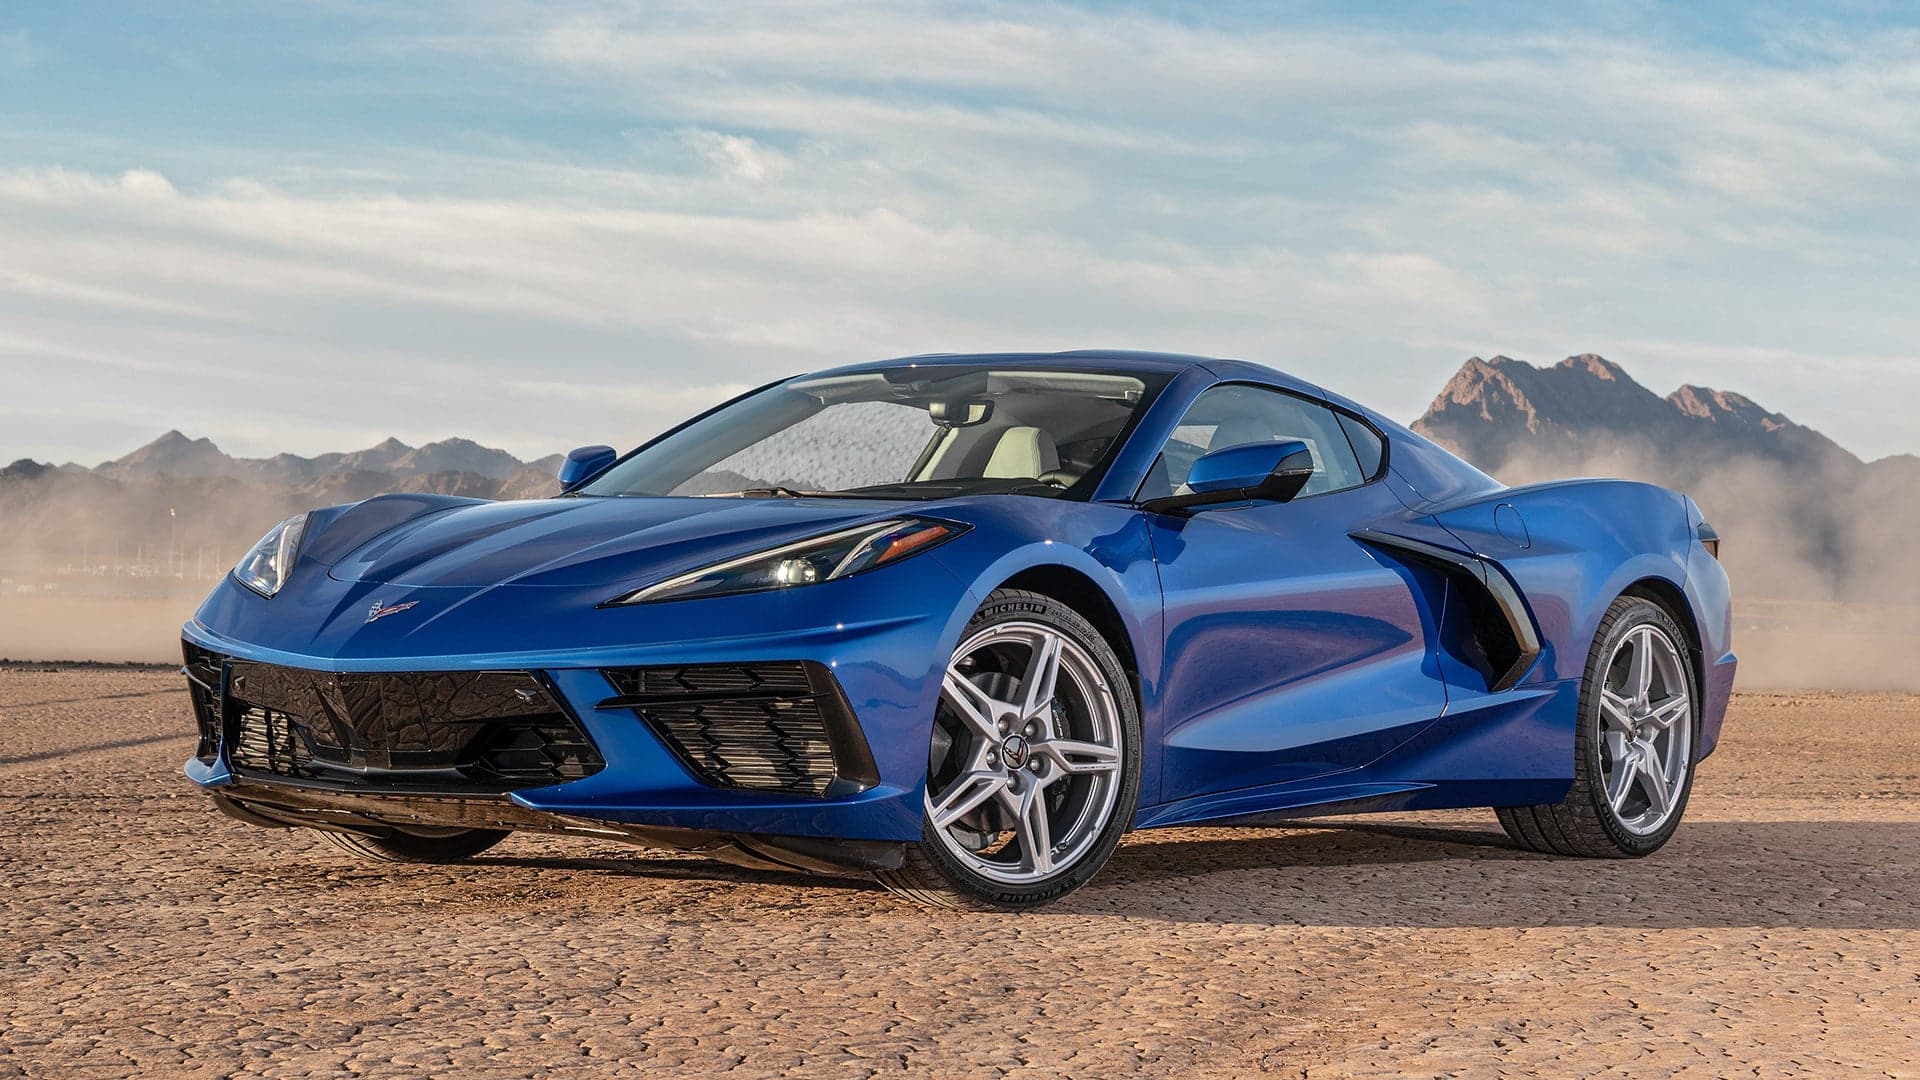 2020 Chevrolet Corvette Stingray Review: A Mid-Engine Marvel That Won’t Tear Your Face Off (Yet)